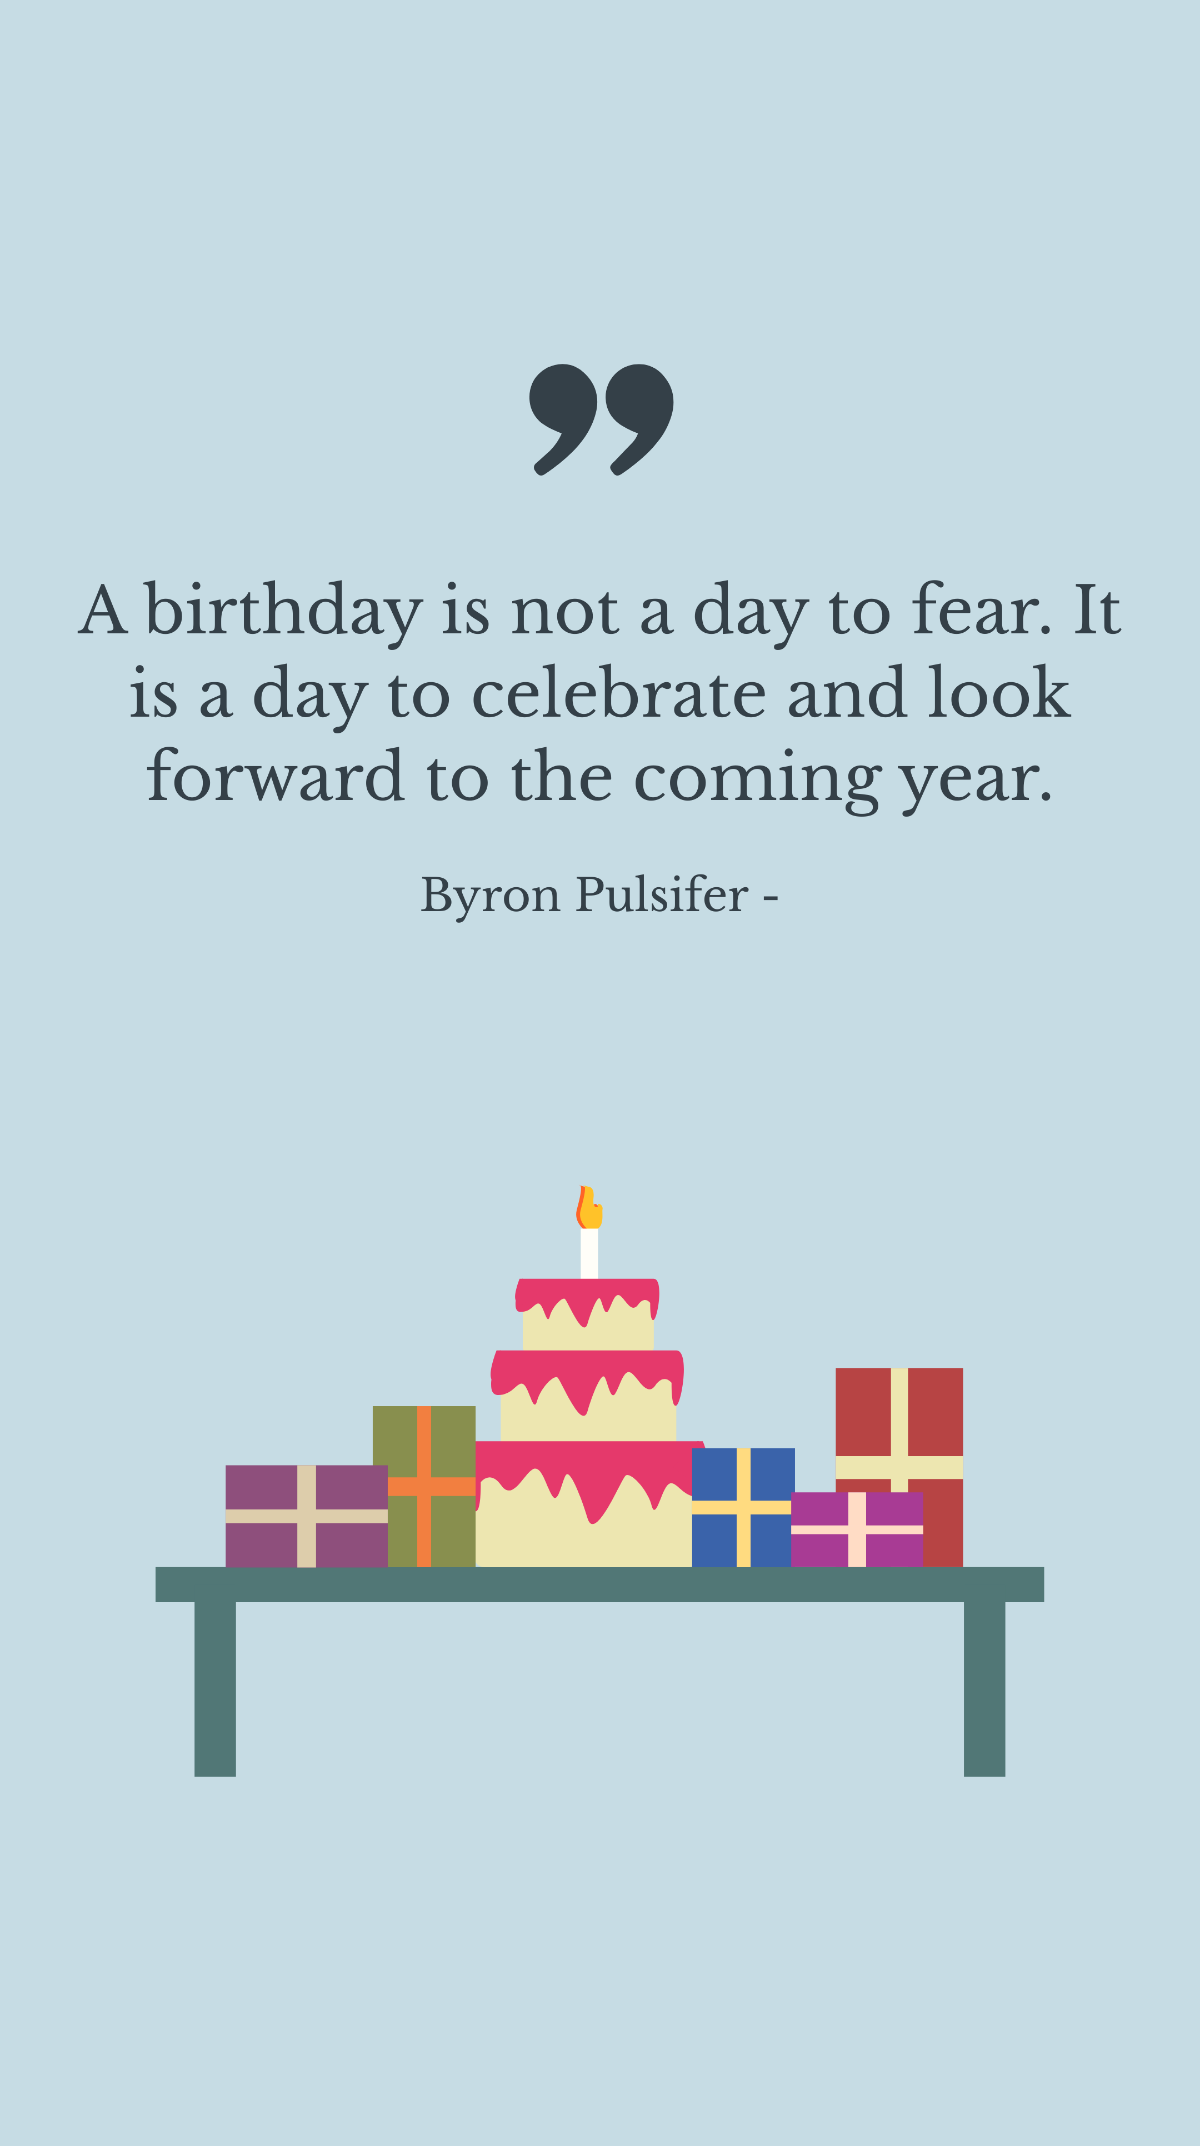 Byron Pulsifer - A birthday is not a day to fear. It is a day to celebrate and look forward to the coming year. Template